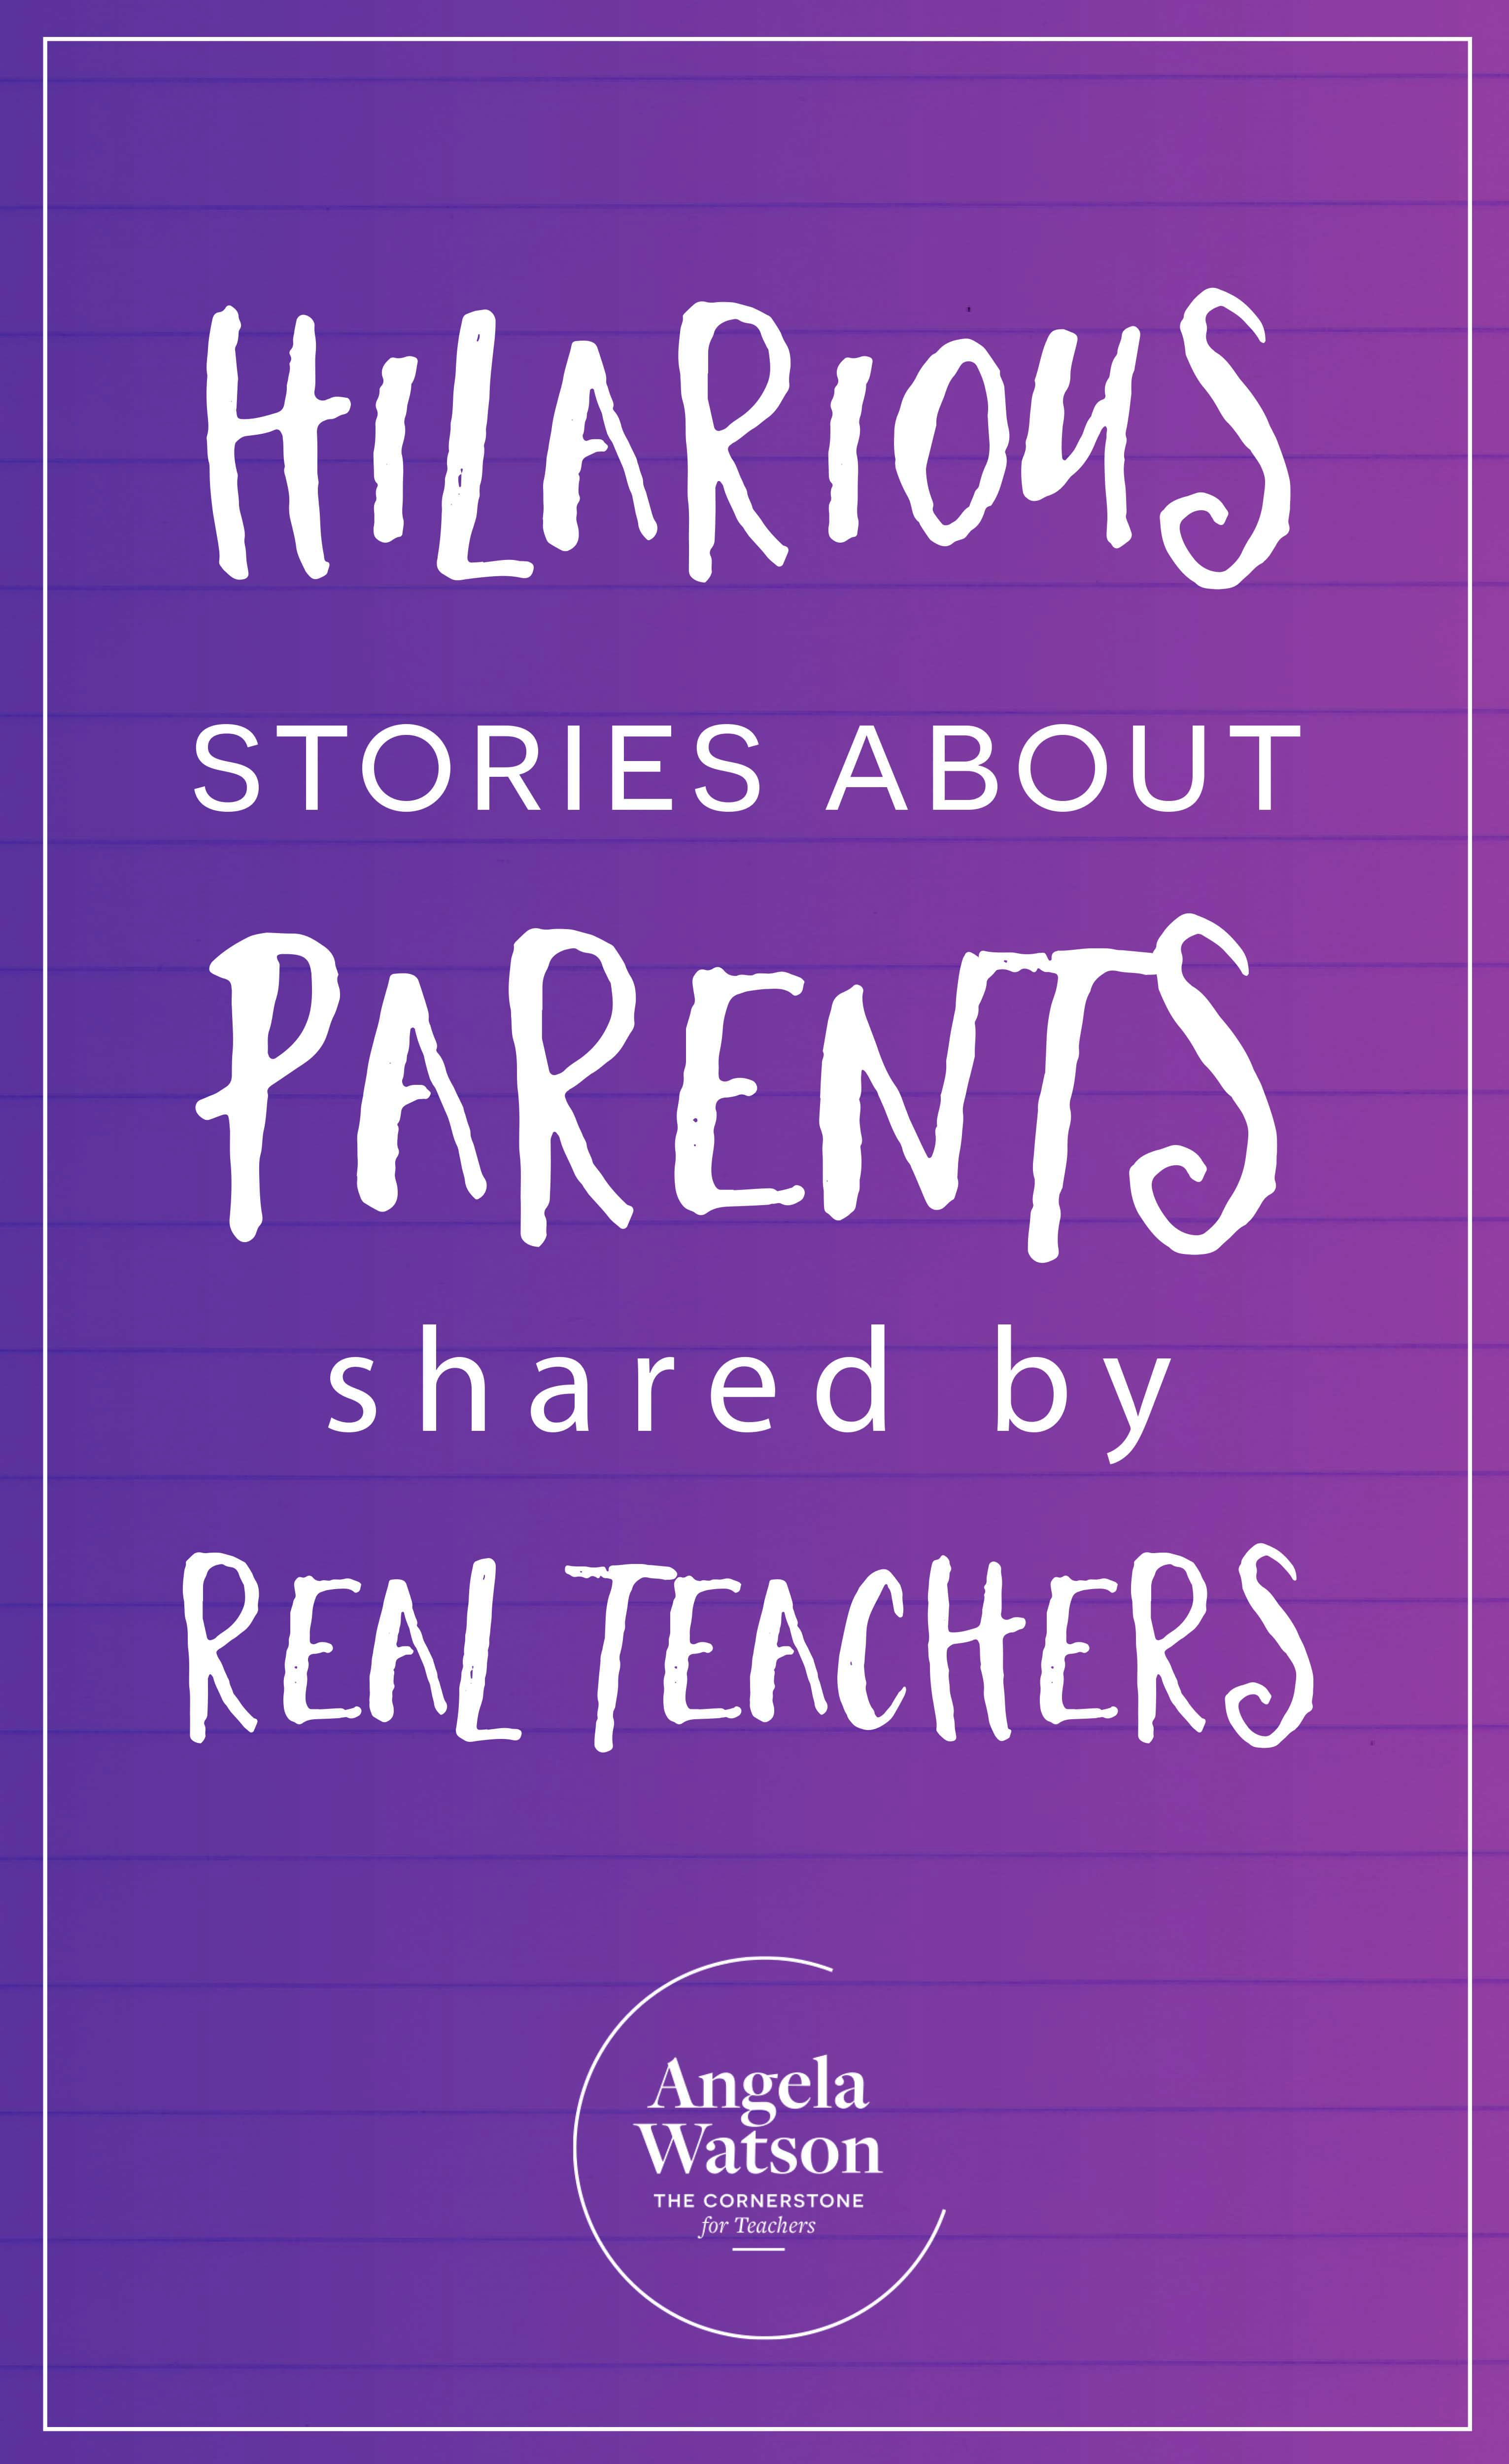 Hilarious stories about parents shared by real teachers